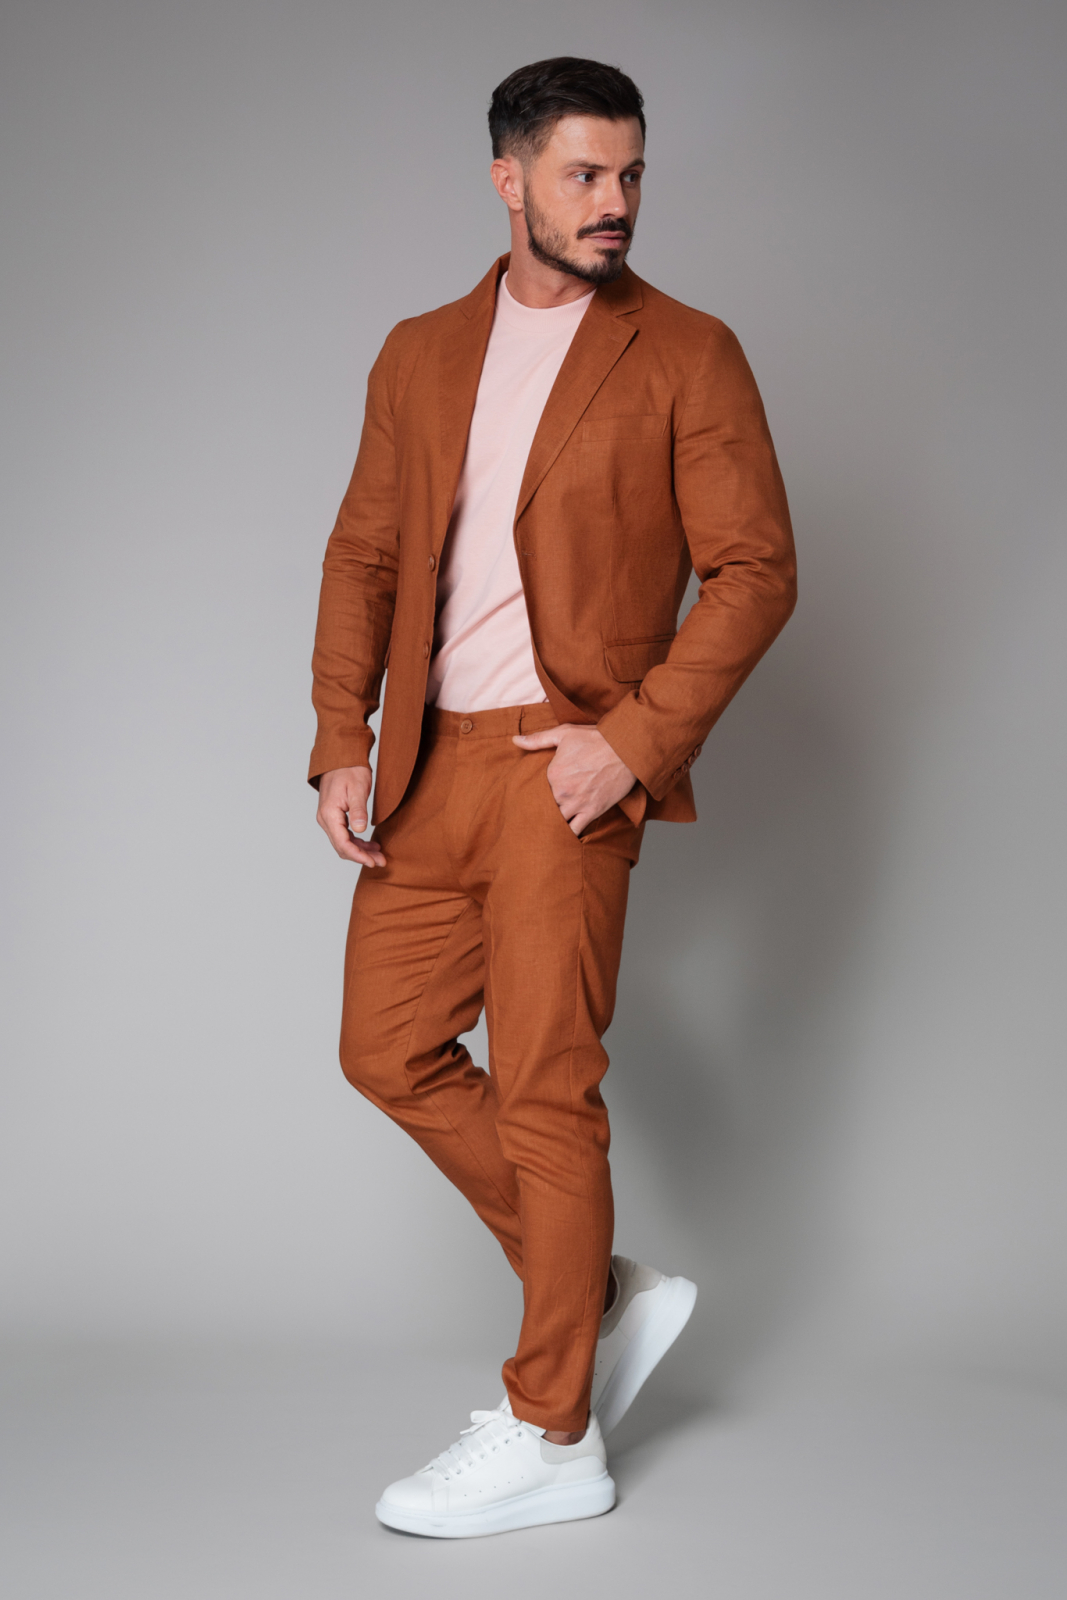 Brown Linen jacket with beige linen pants and shirt